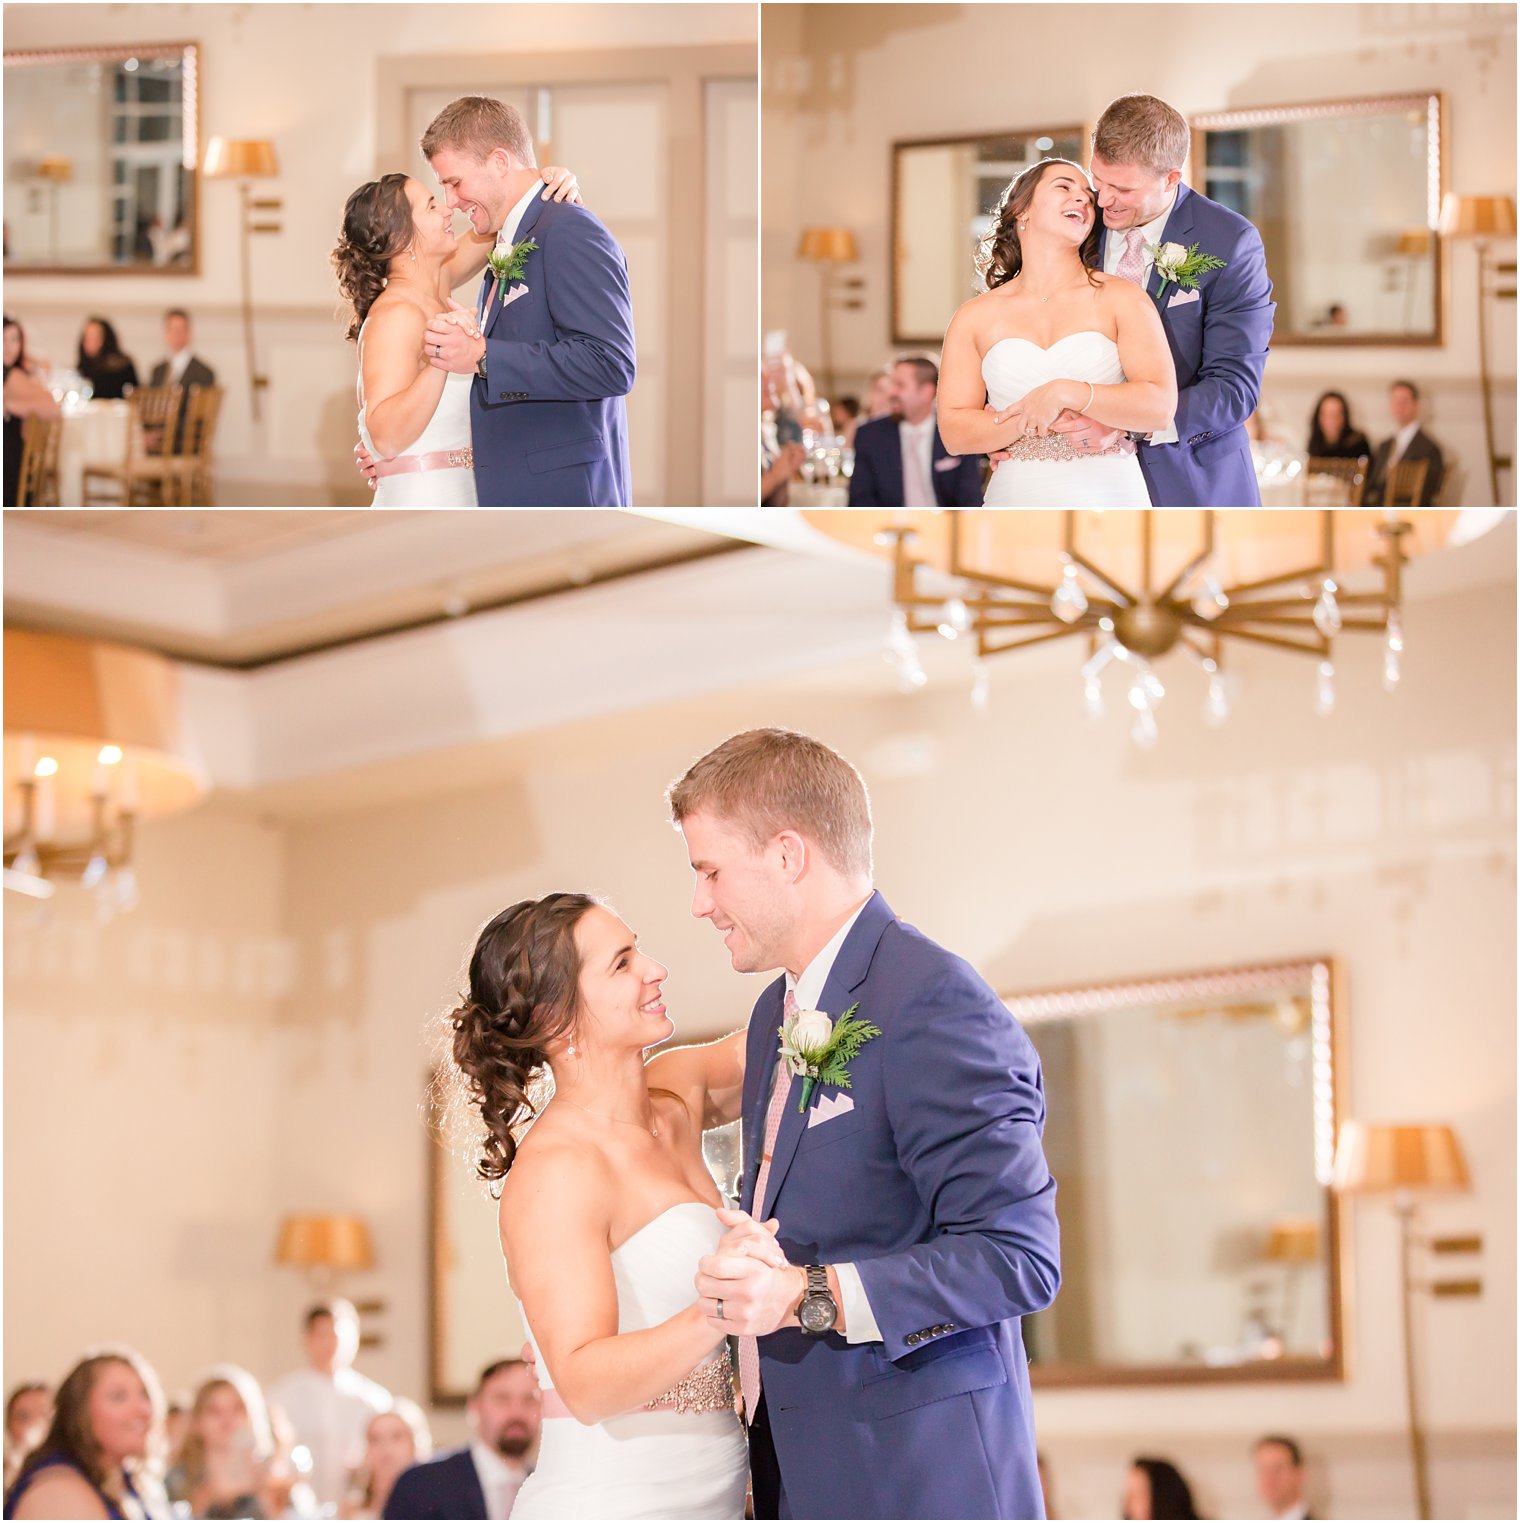 Bride and groom dancing their first dance at Stone House at Stirling Ridge in Warren, NJ